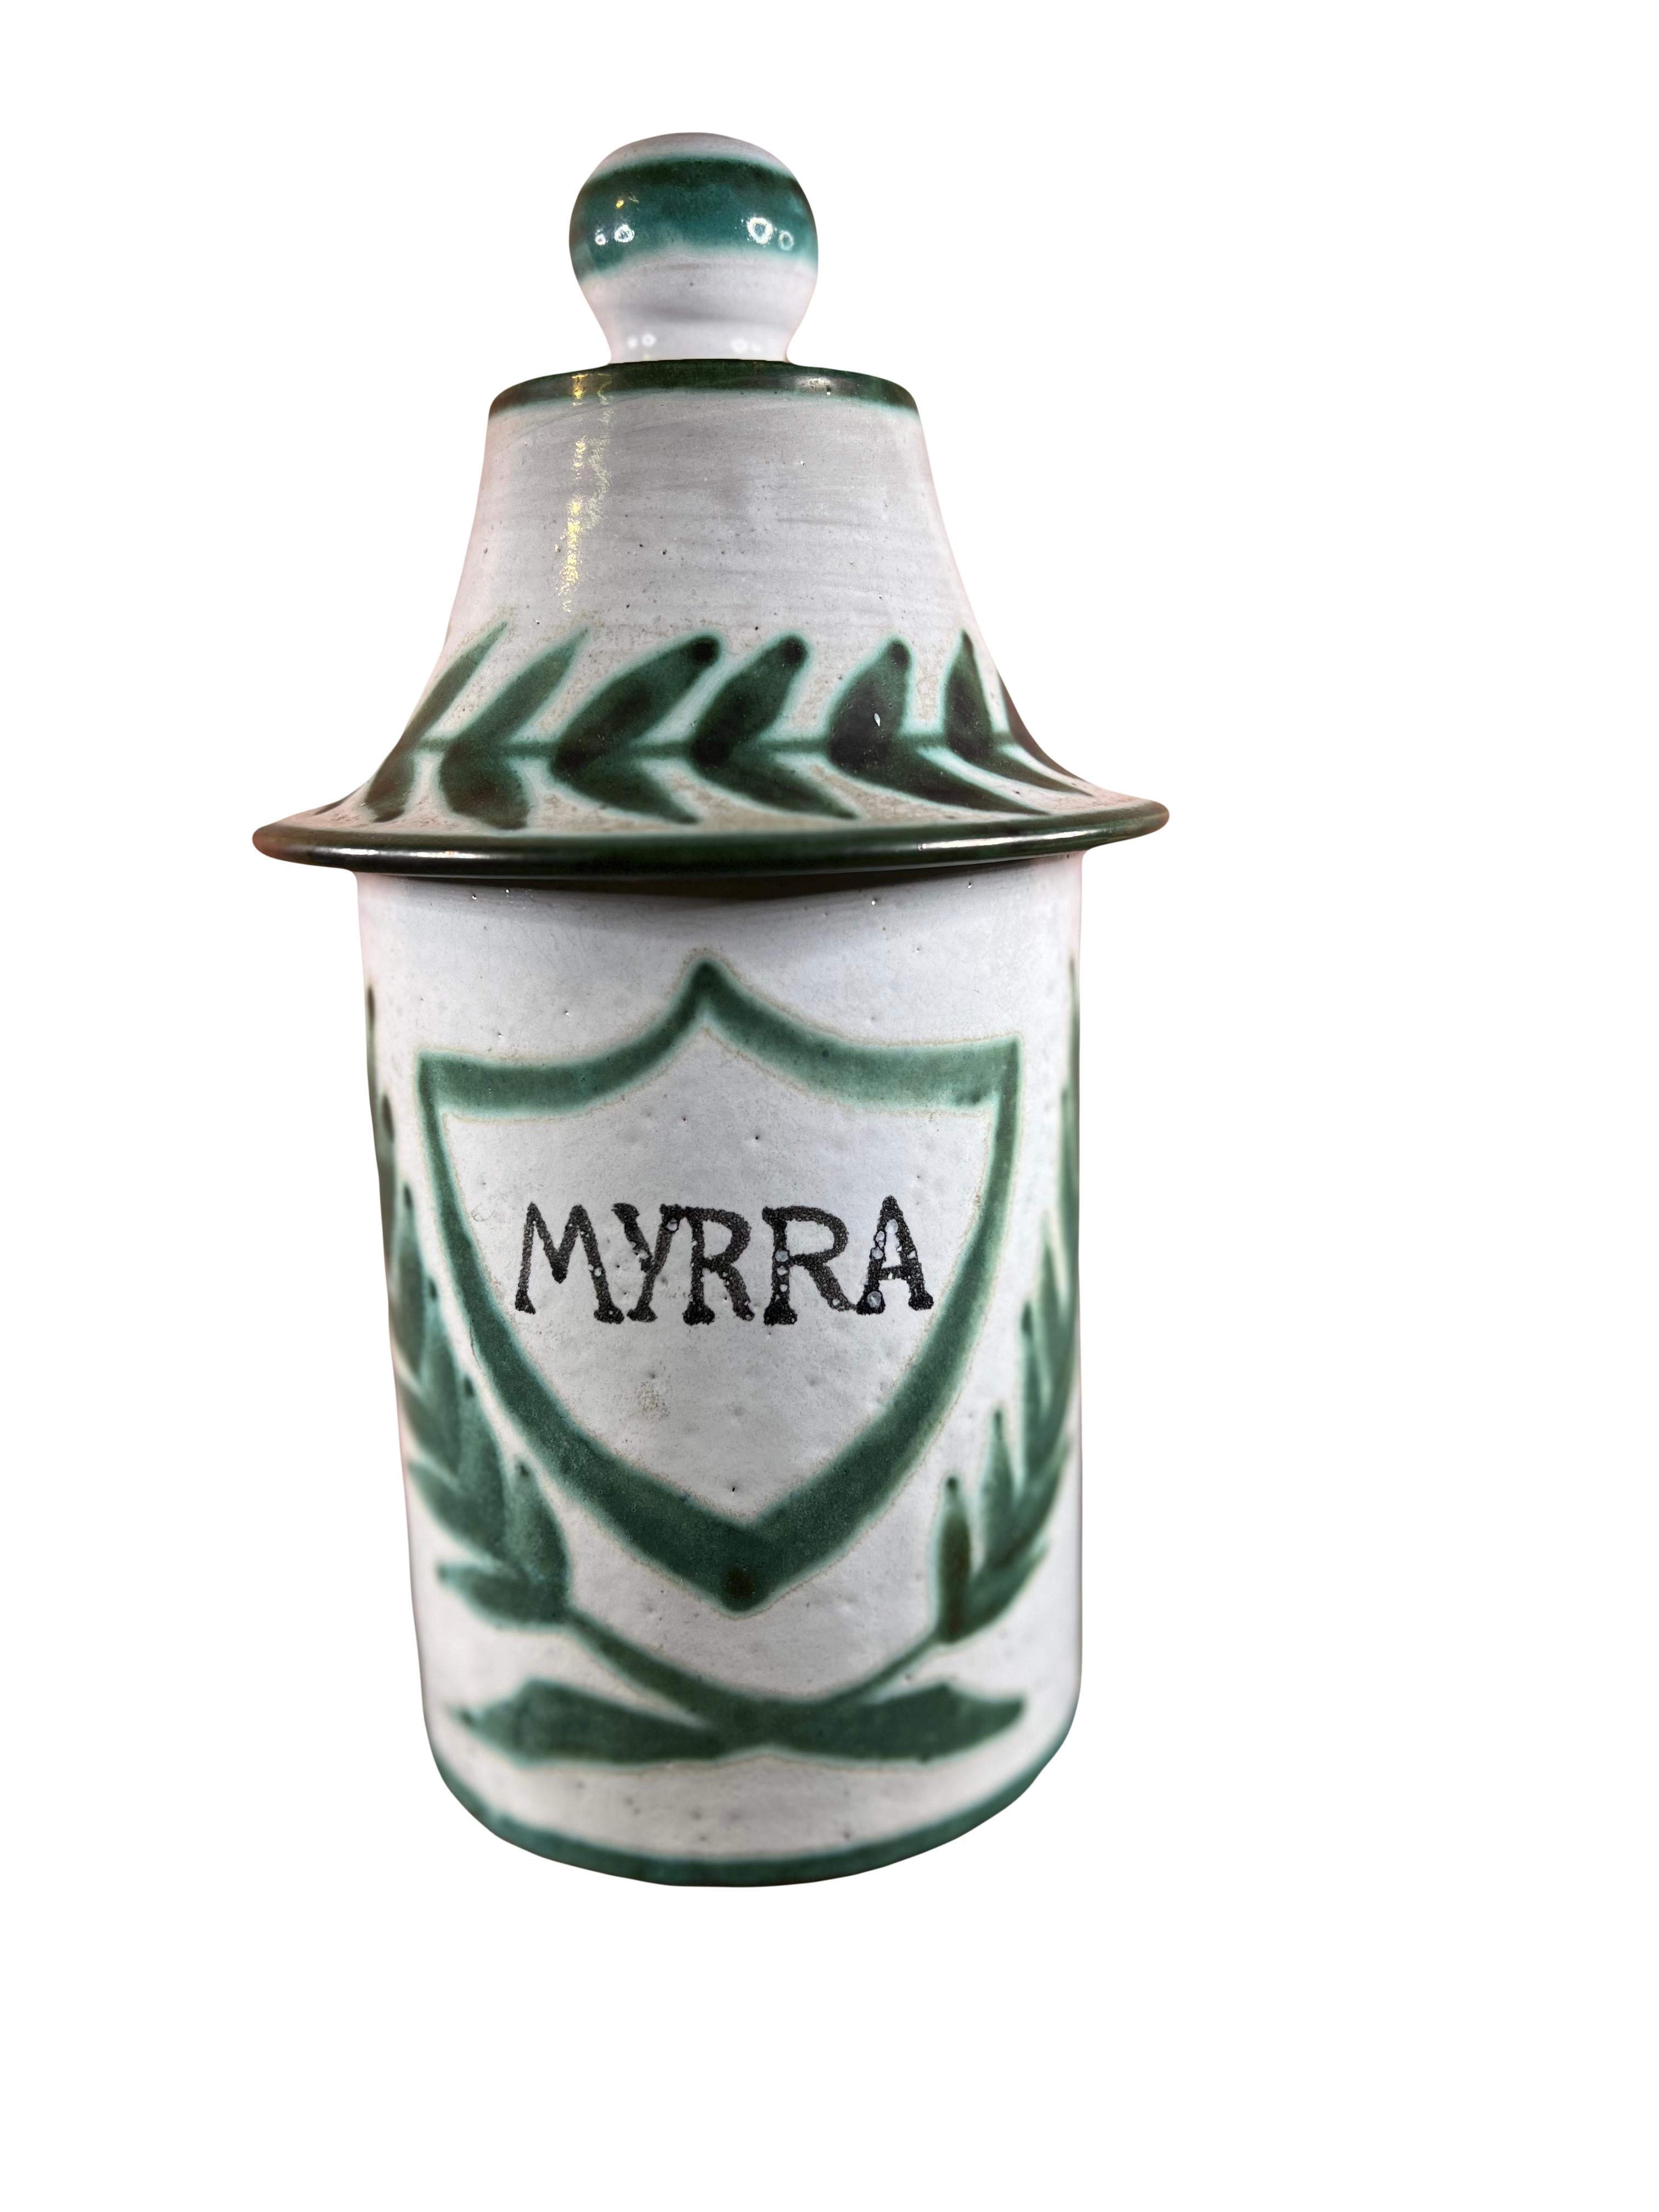 Set of two mid-century pharmacy jars from the 1950s, crafted by Robert Picault. Each jar comes with its own lid. The jars bear a Latin inscription: Myrra and Opiat.
They are in excellent condition and will make a charming addition to your interior,